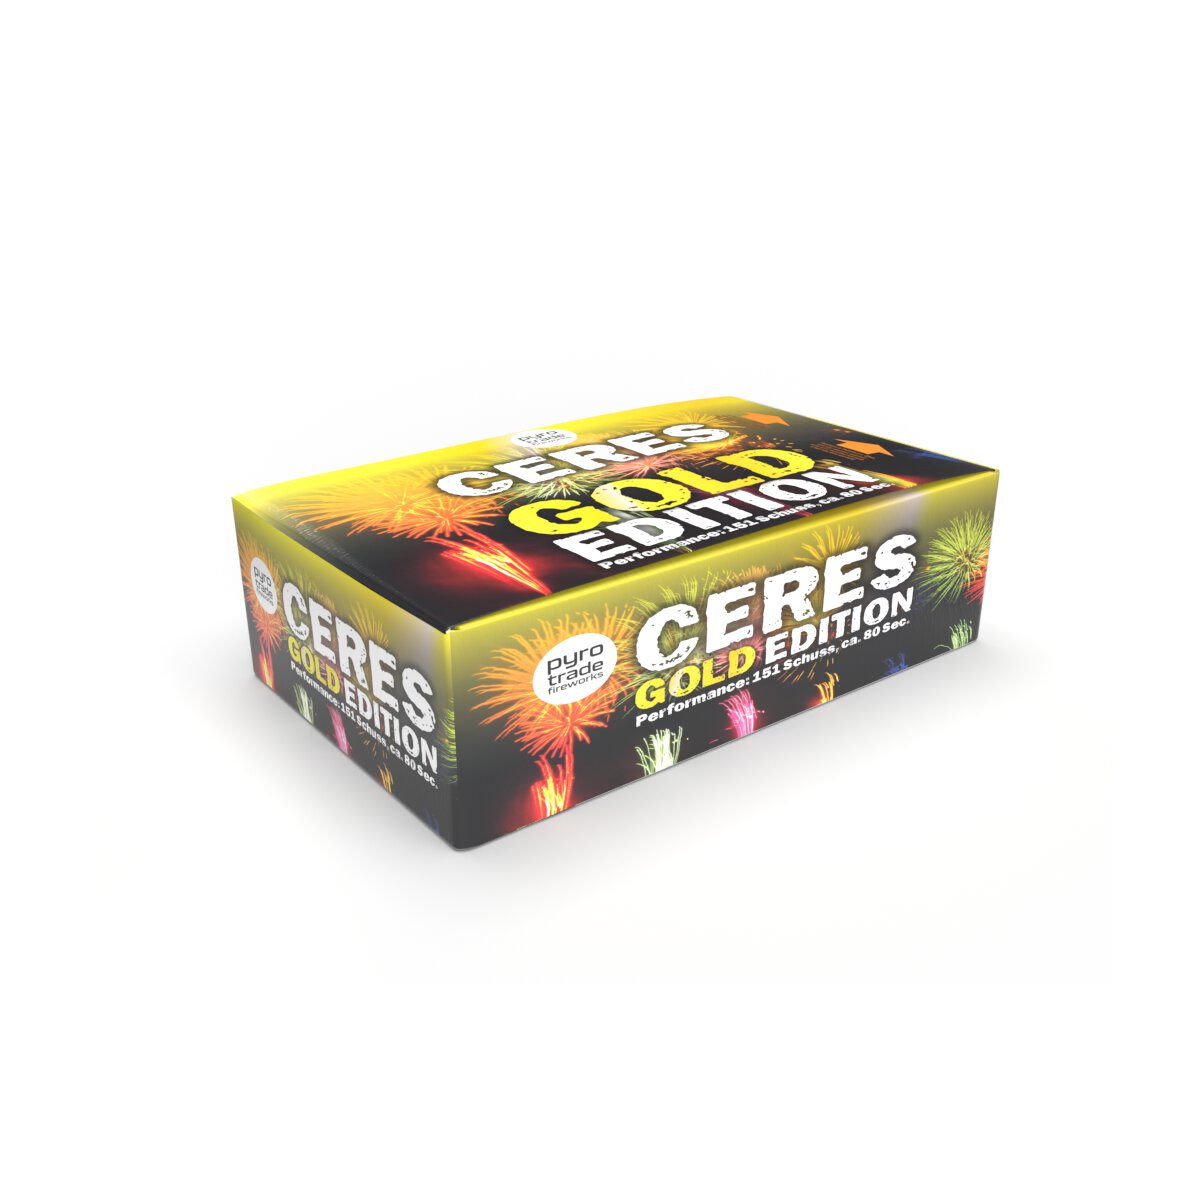 Ceres Gold Edition